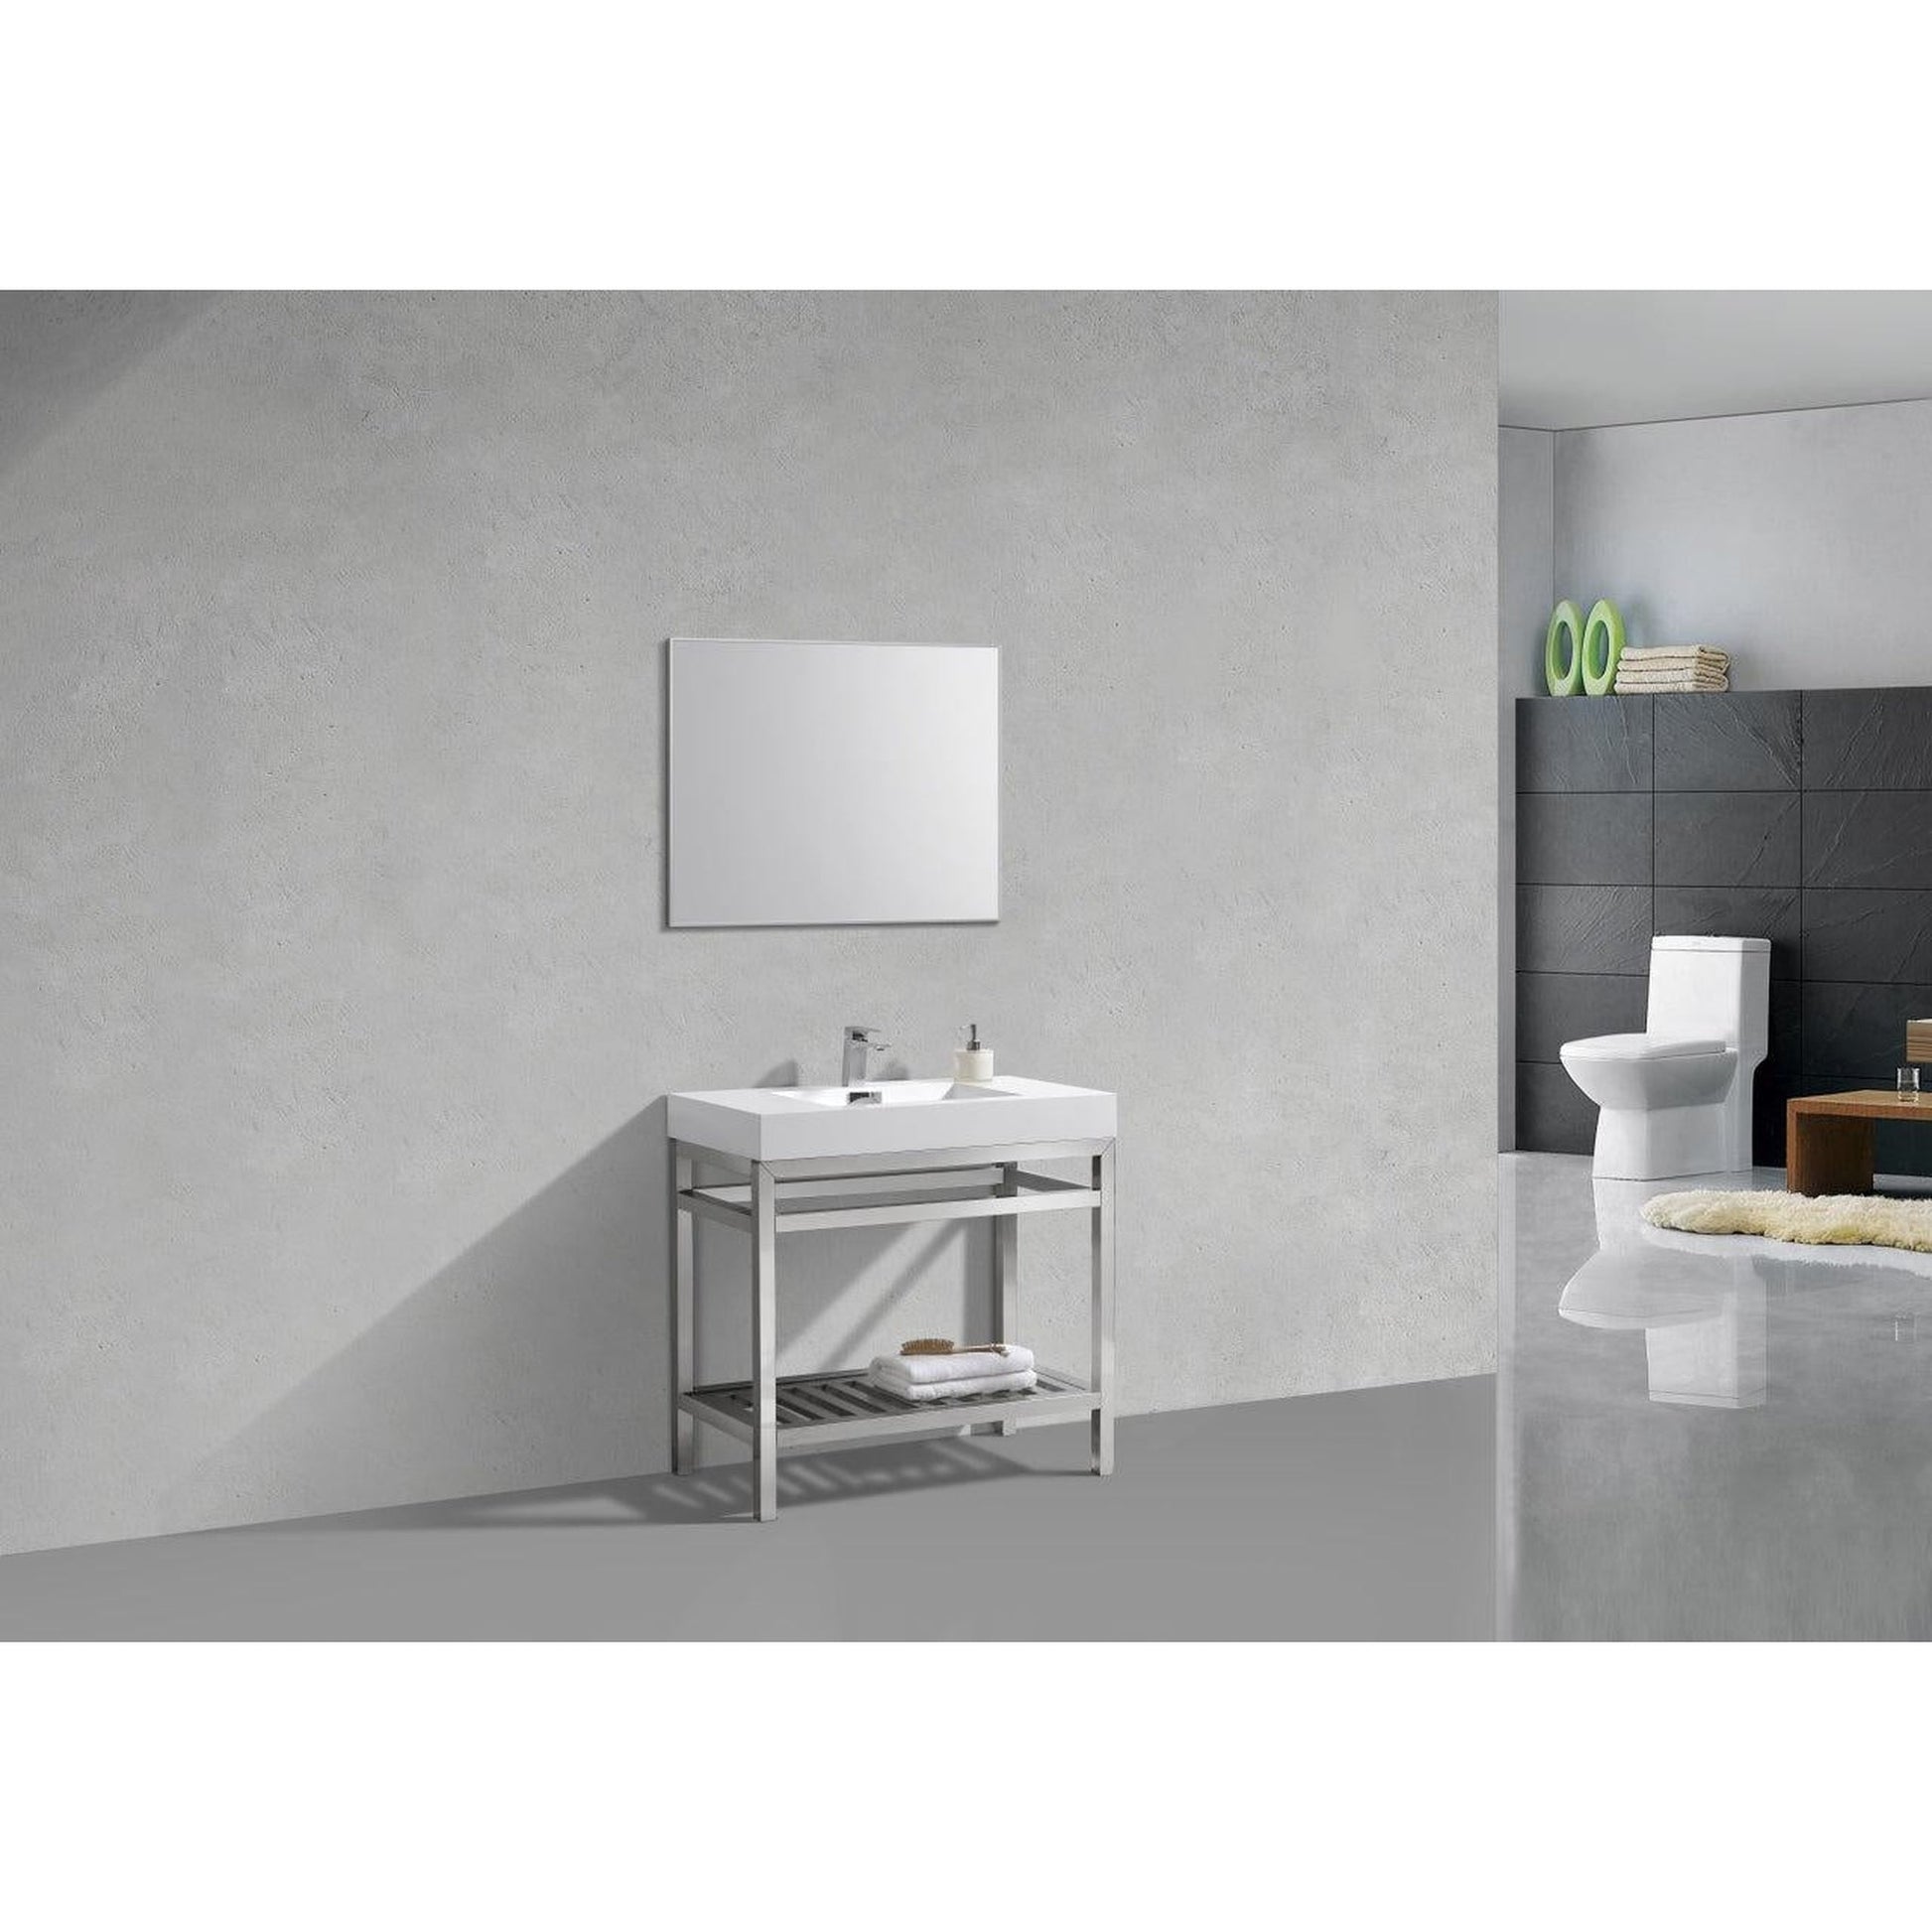 KubeBath Cisco 36" Stainless Steel Chrome Console Freestanding Modern Bathroom Vanity With Single Integrated Acrylic Sink With Overflow and 36" White Framed Mirror